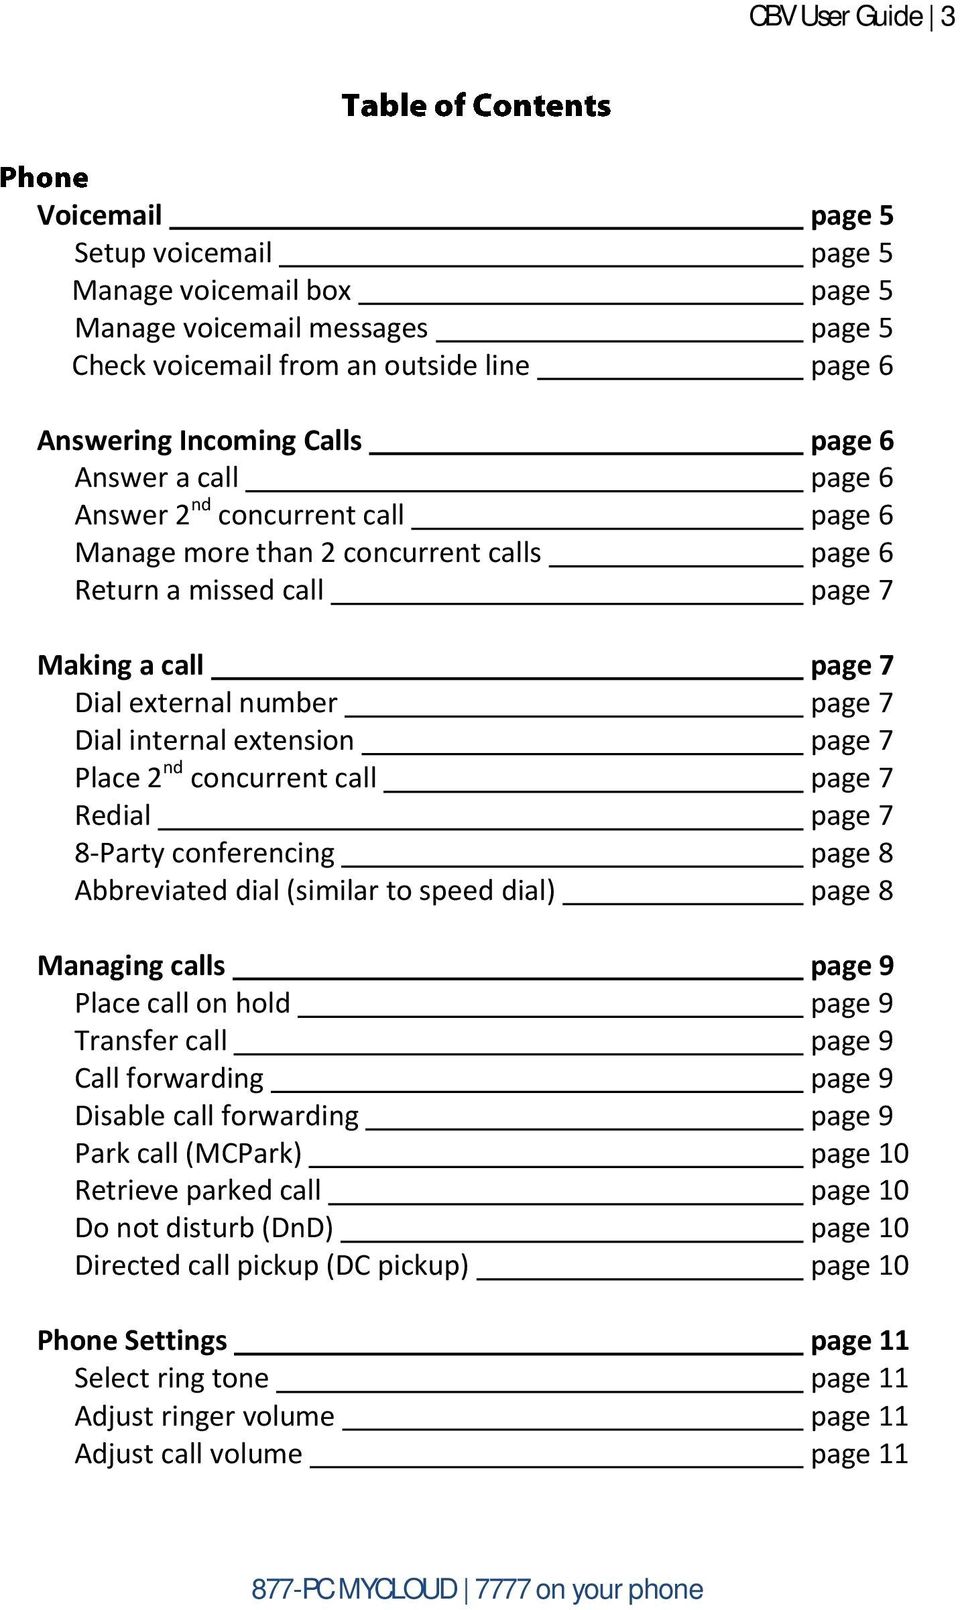 page 7 Place 2 nd concurrent call page 7 Redial page 7 8-Party conferencing page 8 Abbreviated dial (similar to speed dial) page 8 Managing calls page 9 Place call on hold page 9 Transfer call page 9